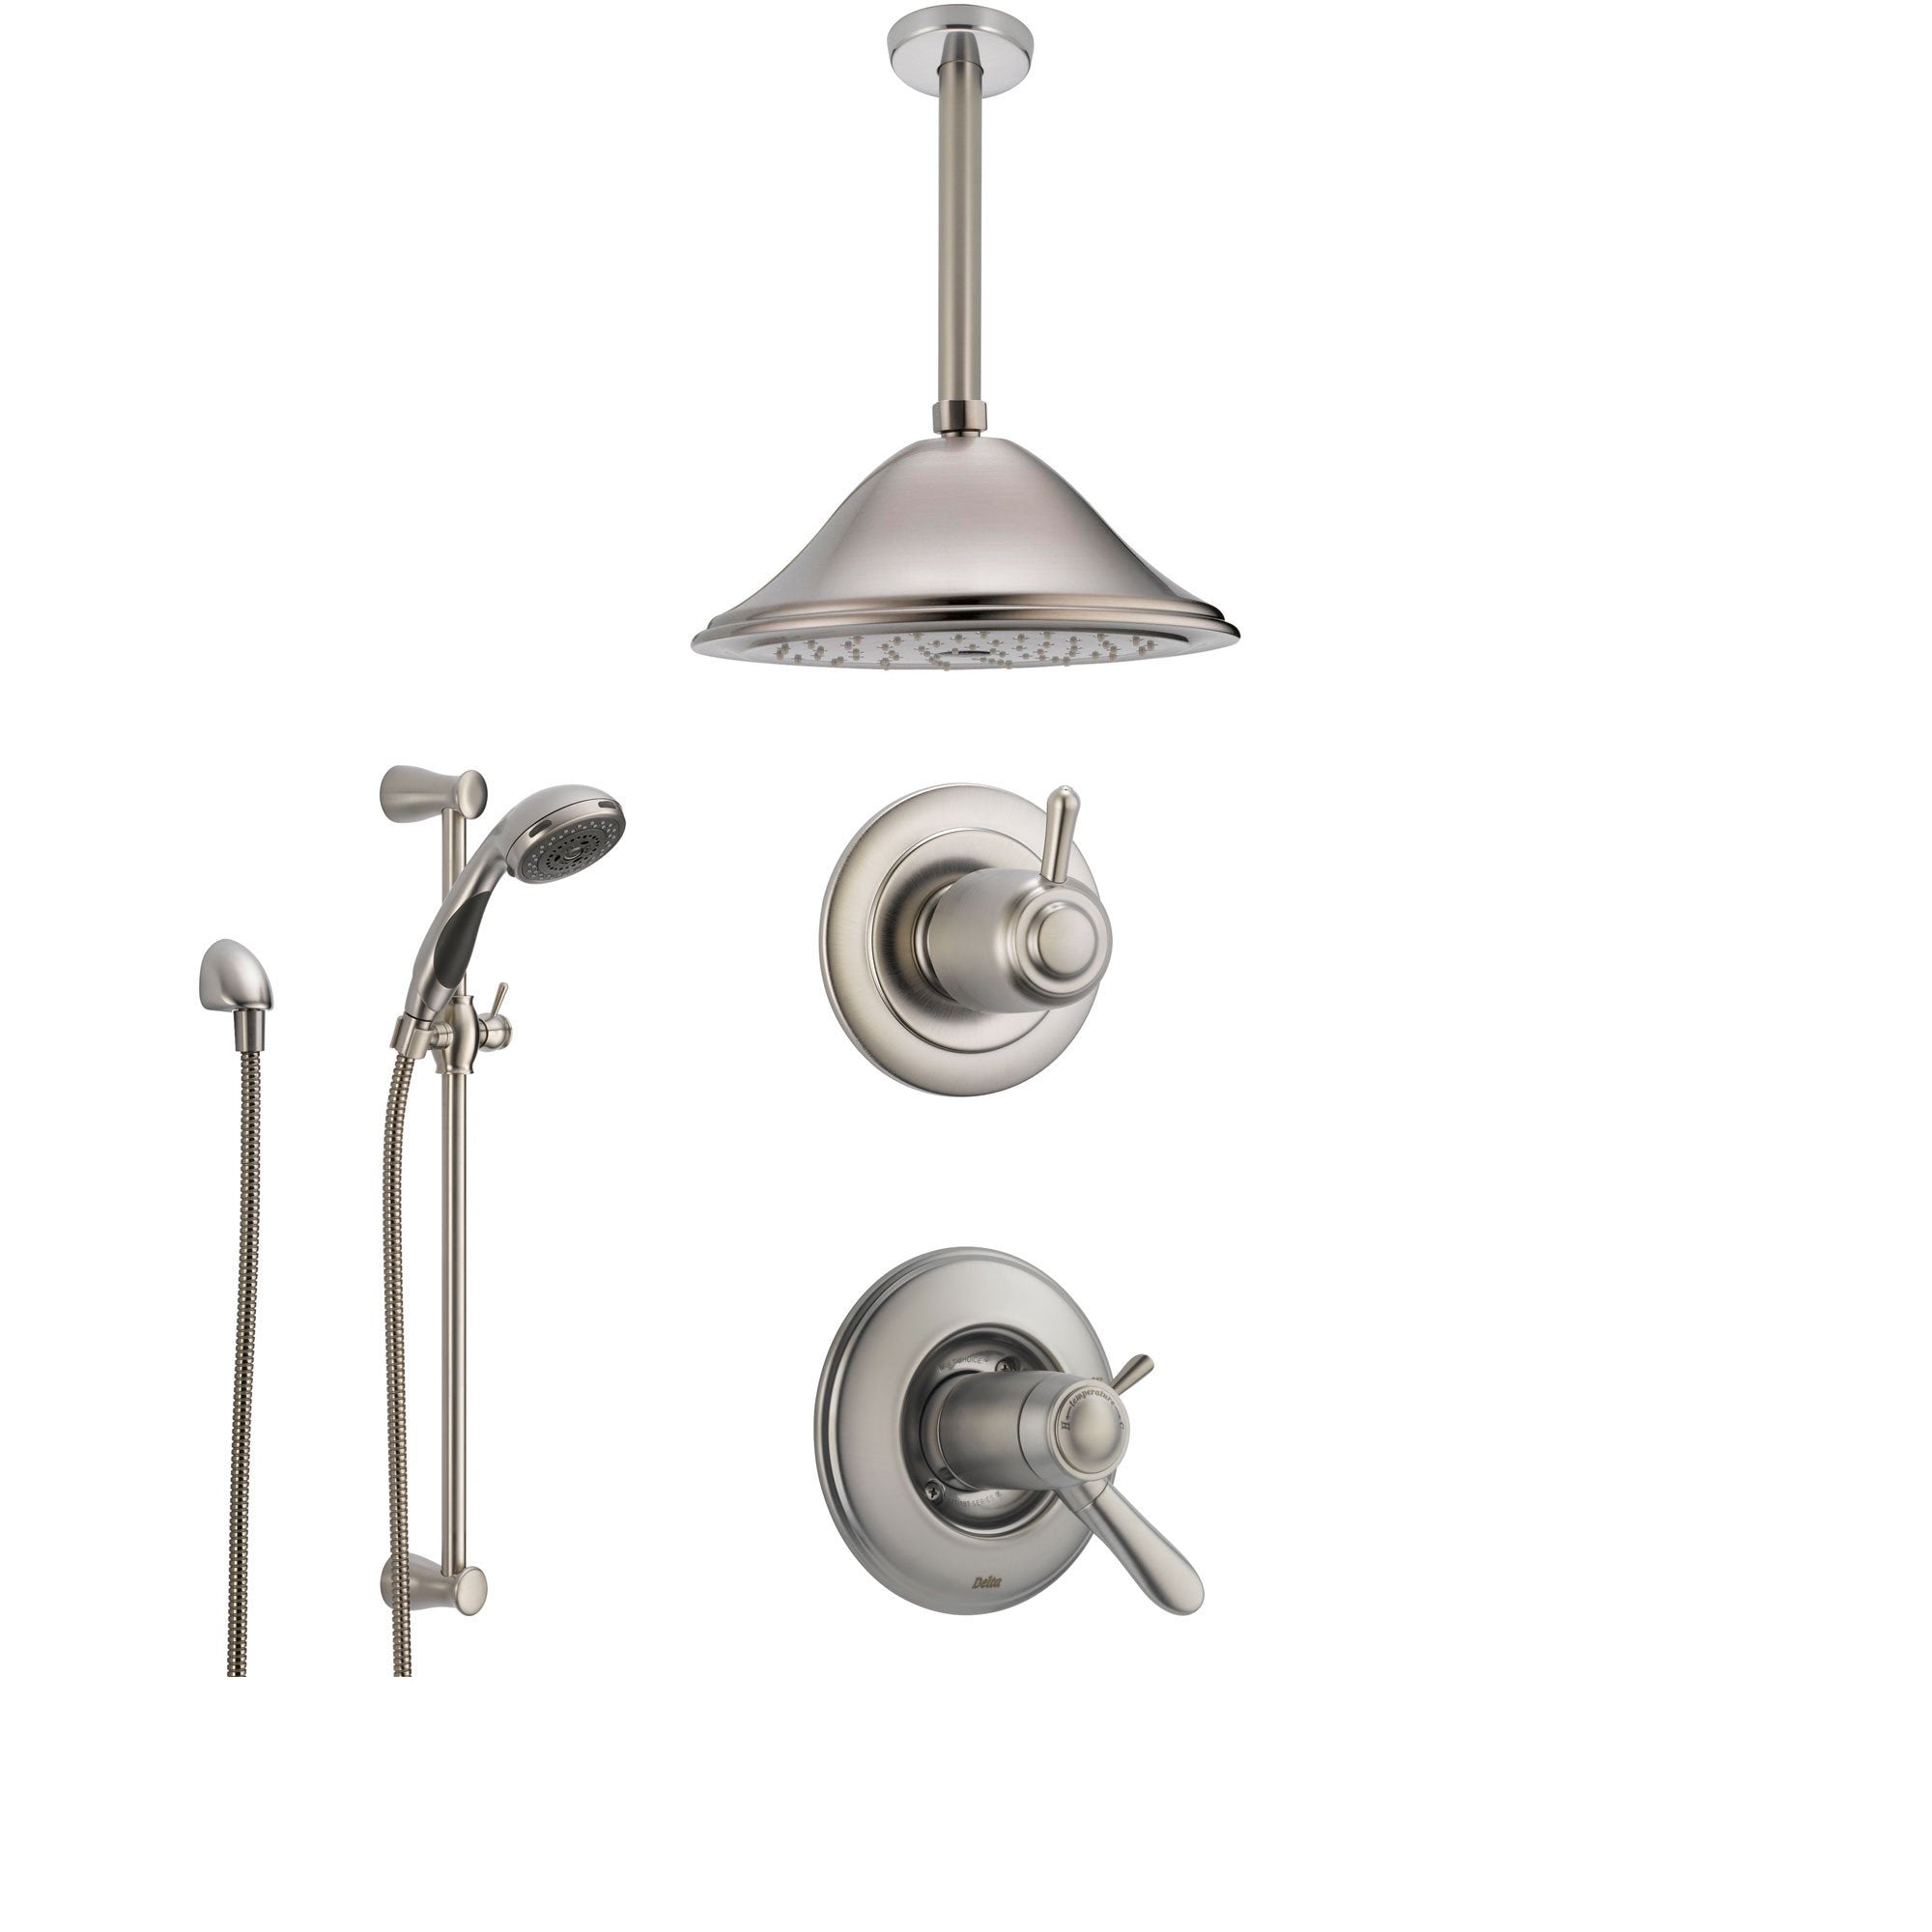 Delta Lahara Stainless Steel Shower System with Thermostatic Shower Handle, 3-setting Diverter, Large Ceiling Mount Rain Showerhead, and Handheld Shower Spray SS17T3883SS